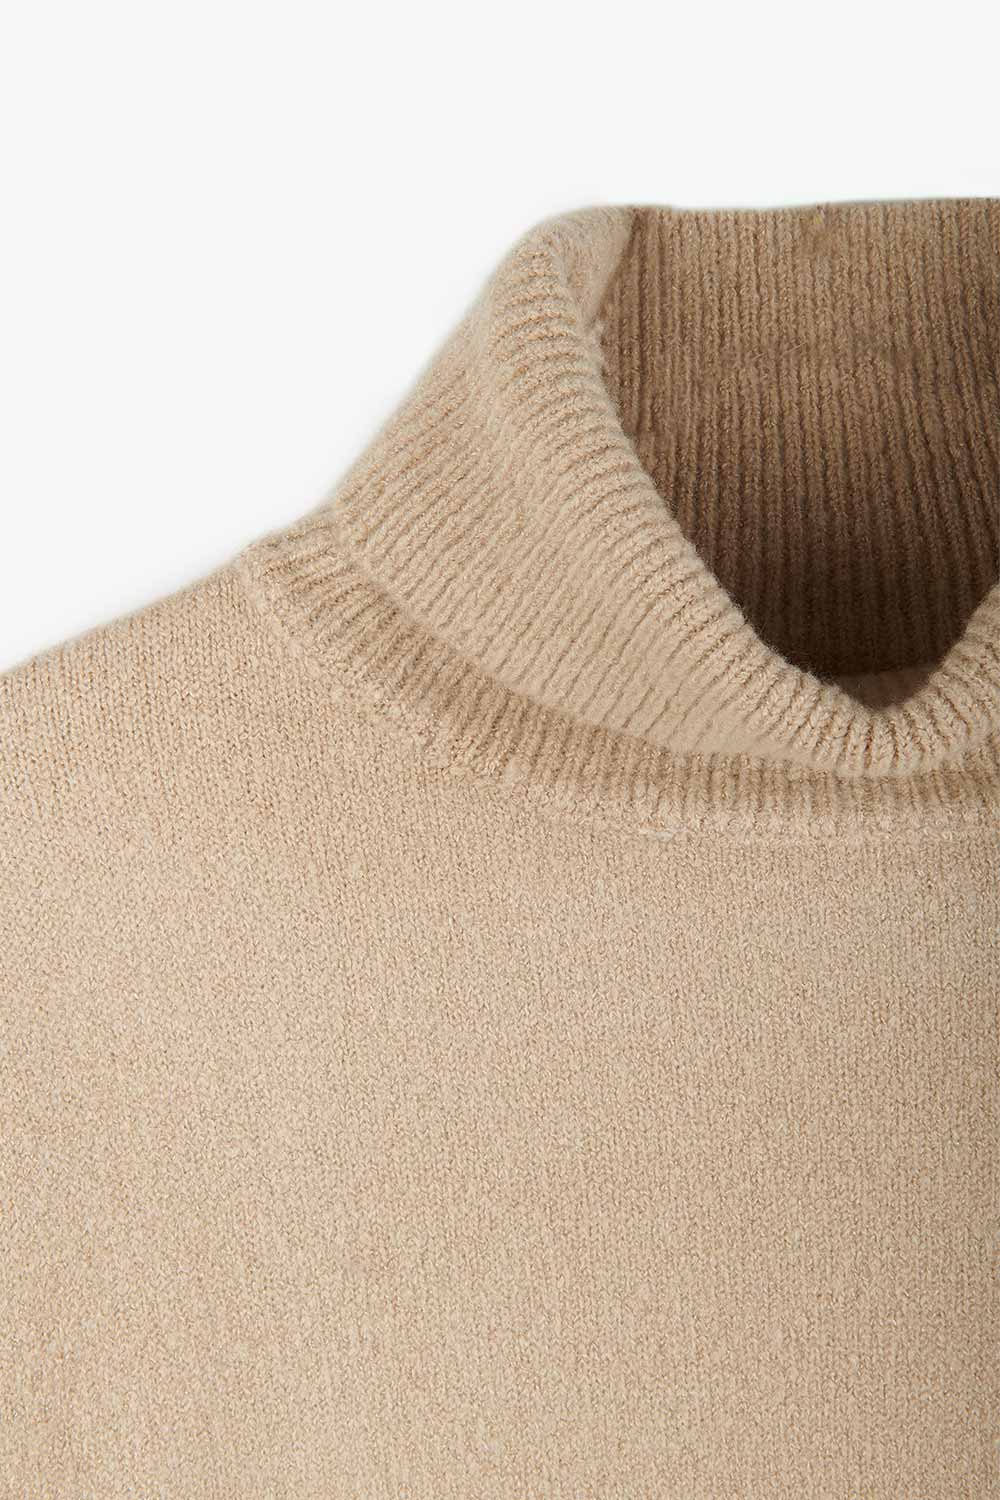 Cropped Turtleneck Sweater